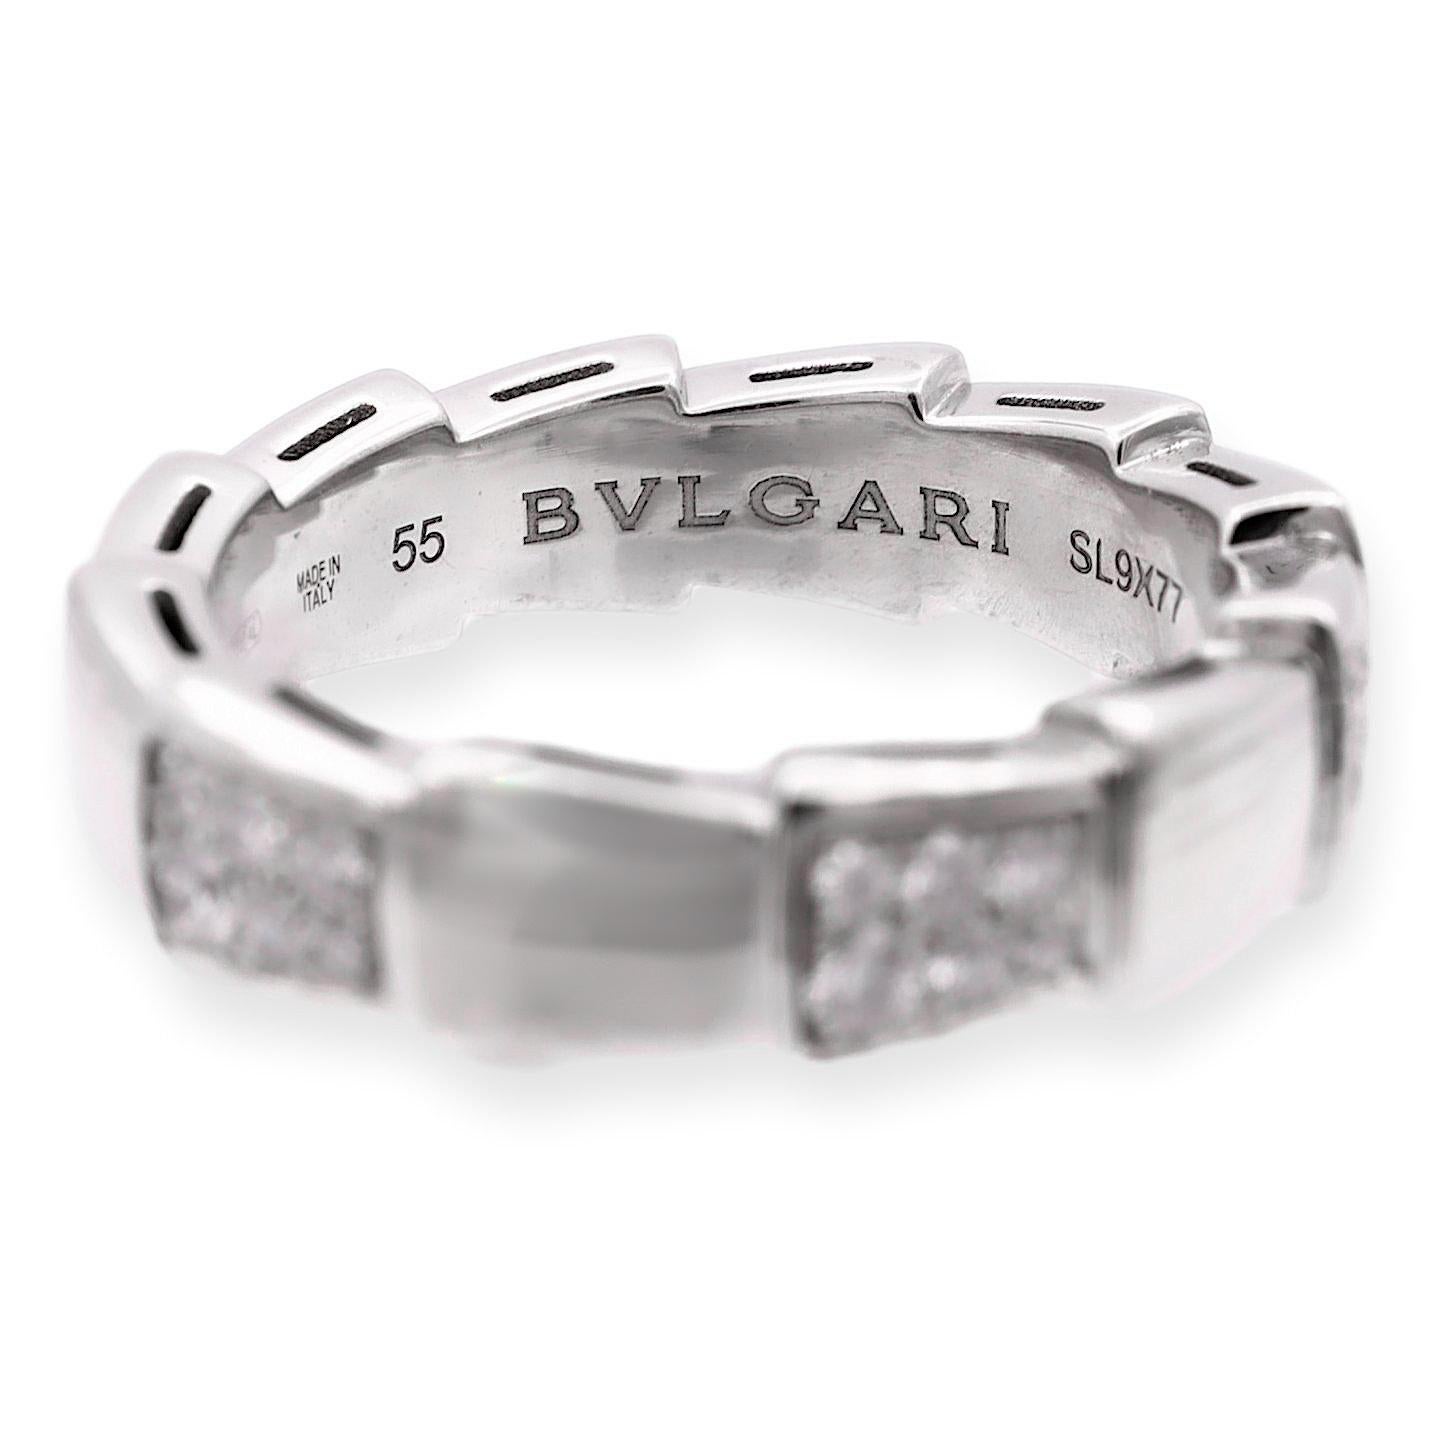 Presenting the Bvlgari Serpenti Viper Ring—a mesmerizing embodiment of opulence and artistry. Crafted from exquisite 18K white gold, this ring exudes luxury from every angle. Its sleek design, measuring 6mm in width, gracefully wraps around the